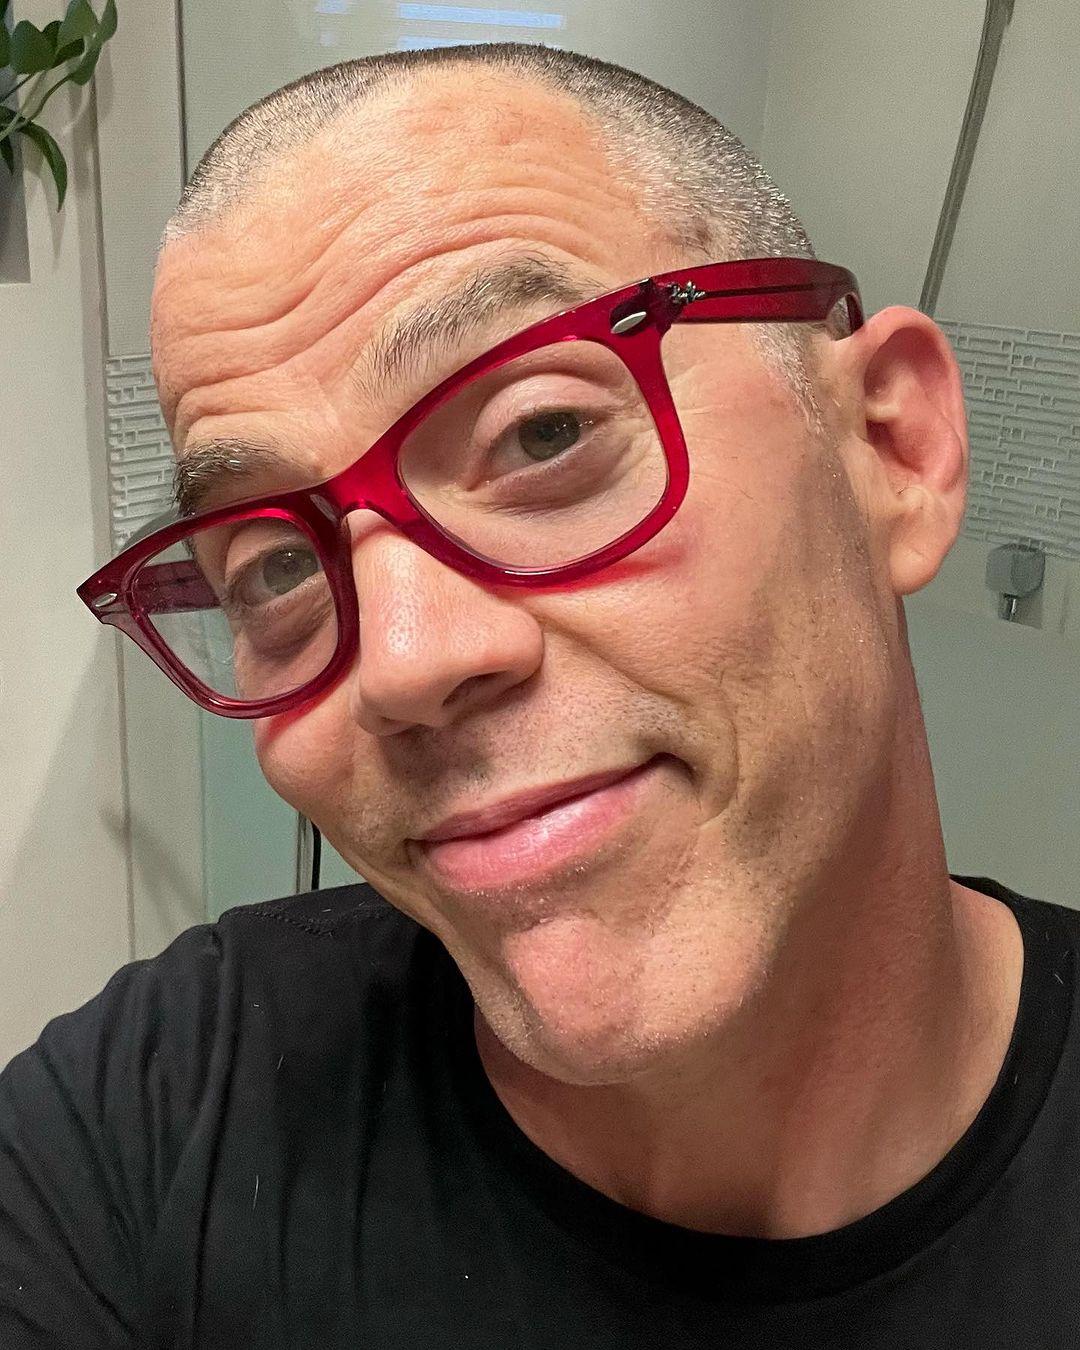 Steve-O leaves Los Angeles because the Red State will pay lower taxes and puts the Hollywood Mansion up for sale